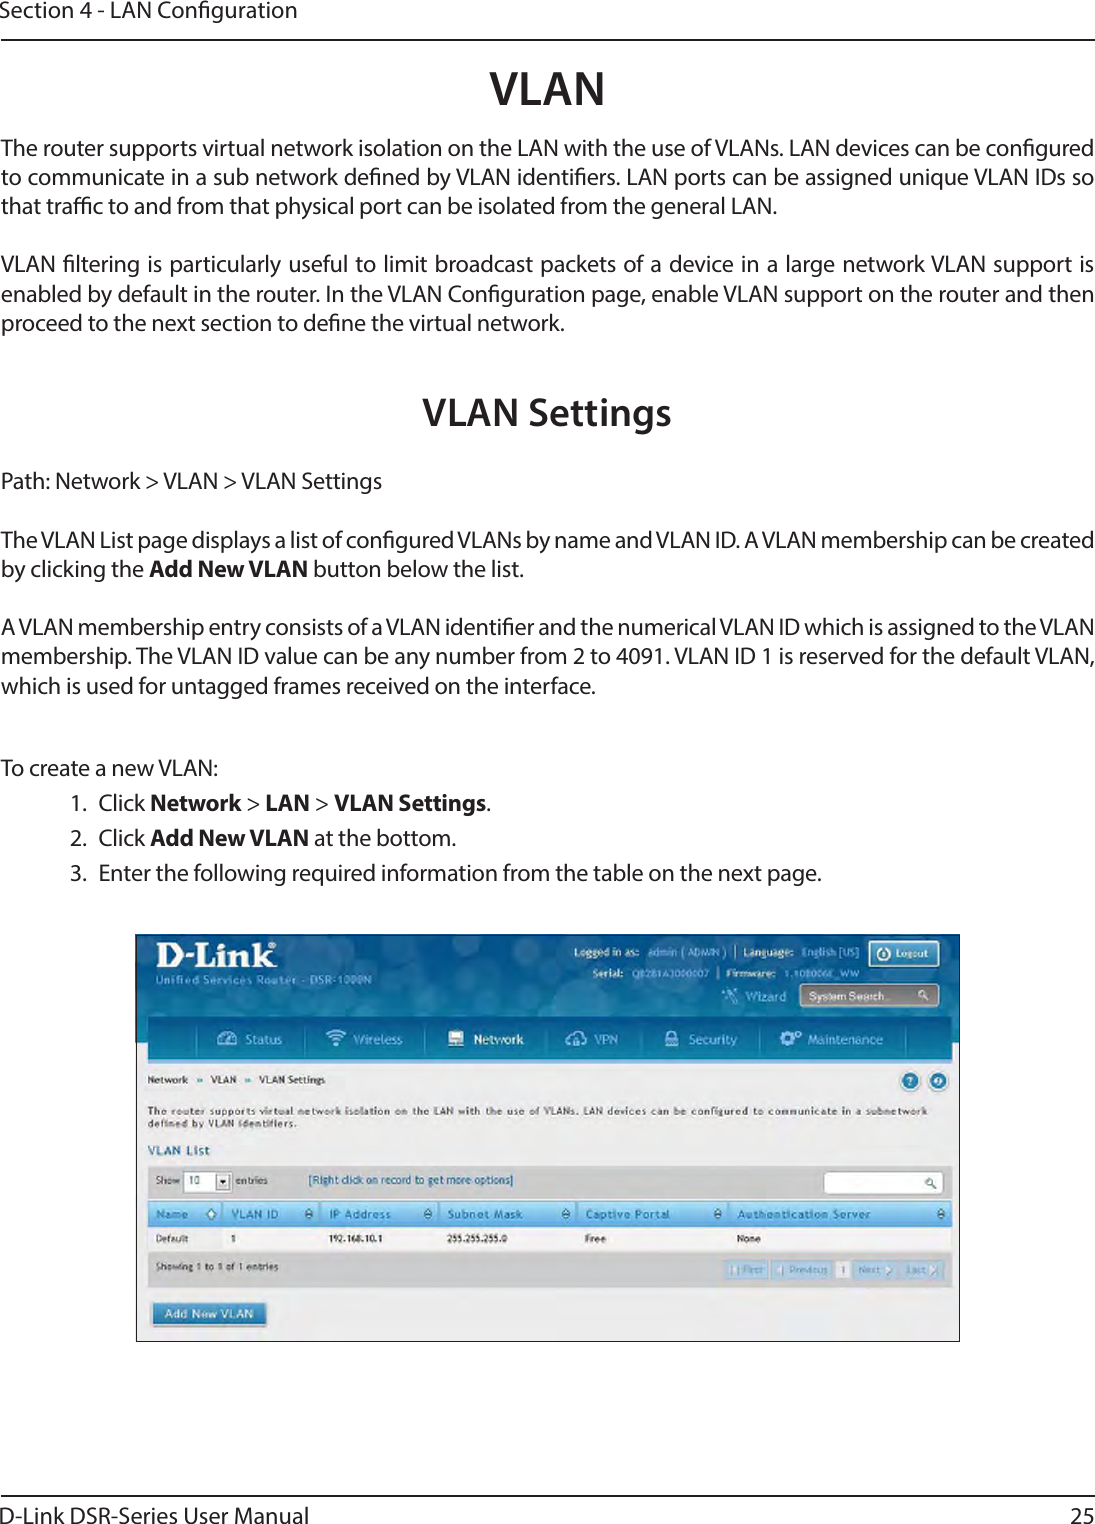 D-Link DSR-Series User Manual 25Section 4 - LAN CongurationVLANVLAN SettingsPath: Network &gt; VLAN &gt; VLAN SettingsThe VLAN List page displays a list of congured VLANs by name and VLAN ID. A VLAN membership can be created by clicking the Add New VLAN button below the list.A VLAN membership entry consists of a VLAN identier and the numerical VLAN ID which is assigned to the VLAN membership. The VLAN ID value can be any number from 2 to 4091. VLAN ID 1 is reserved for the default VLAN, which is used for untagged frames received on the interface.The router supports virtual network isolation on the LAN with the use of VLANs. LAN devices can be congured to communicate in a sub network dened by VLAN identiers. LAN ports can be assigned unique VLAN IDs so that trac to and from that physical port can be isolated from the general LAN.VLAN ltering is particularly useful to limit broadcast packets of a device in a large network VLAN support is enabled by default in the router. In the VLAN Conguration page, enable VLAN support on the router and then proceed to the next section to dene the virtual network. To create a new VLAN: 1. Click Network &gt; LAN &gt; VLAN Settings. 2. Click Add New VLAN at the bottom.3.  Enter the following required information from the table on the next page.